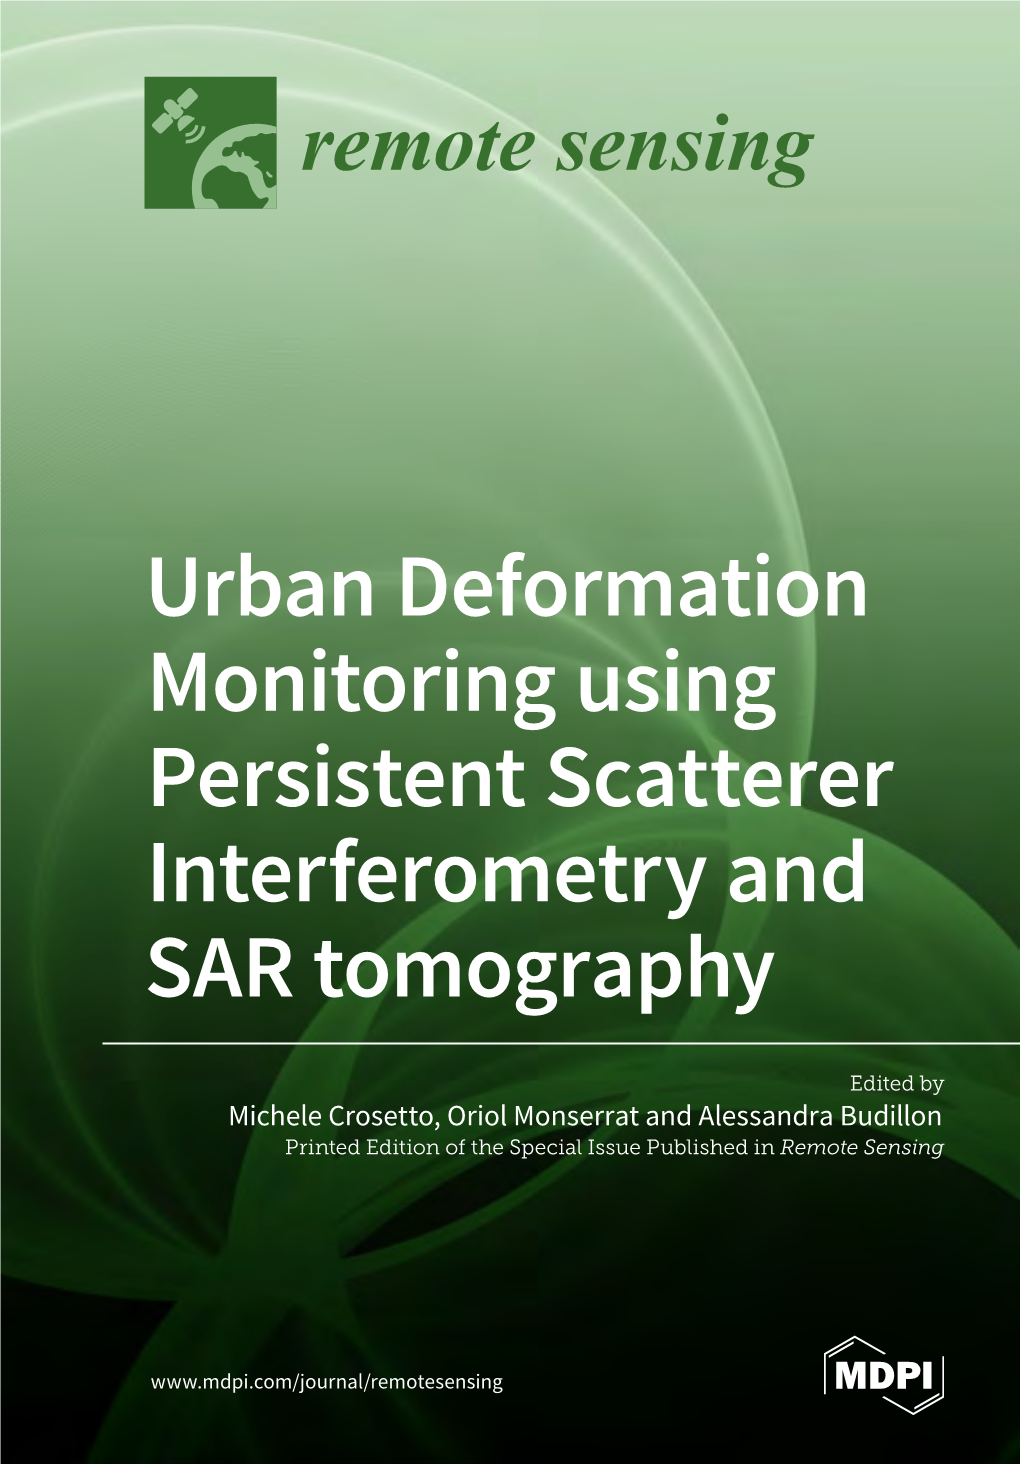 Urban Deformation Monitoring Using Persistent Scatterer Interferometry and SAR Tomography